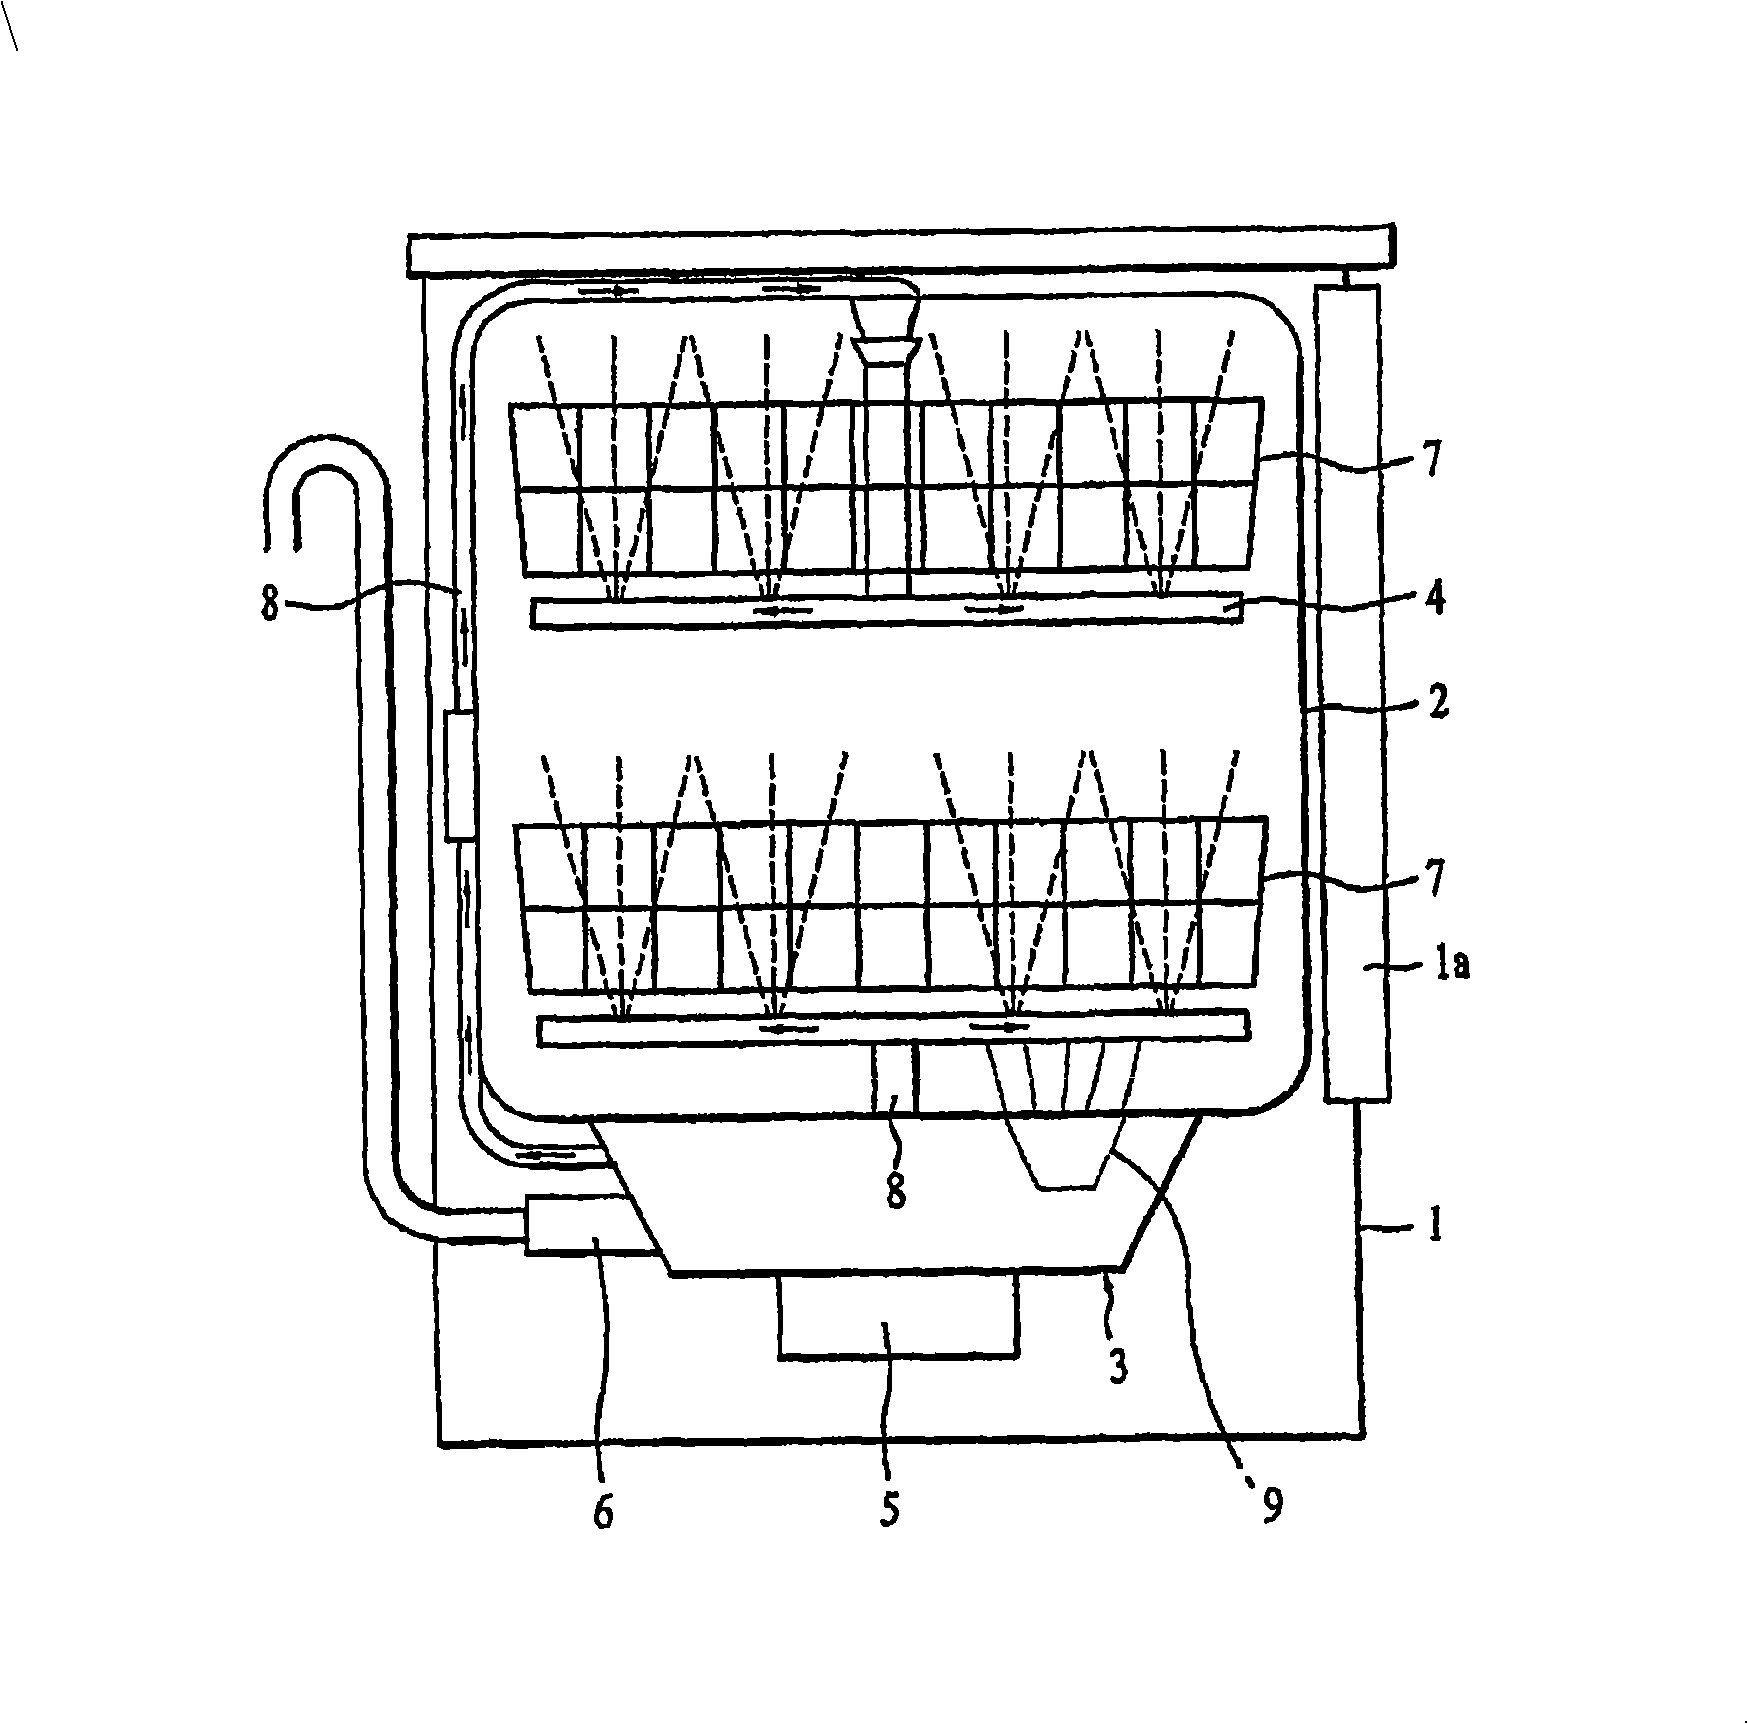 Dish washer with uv sterilization device therein